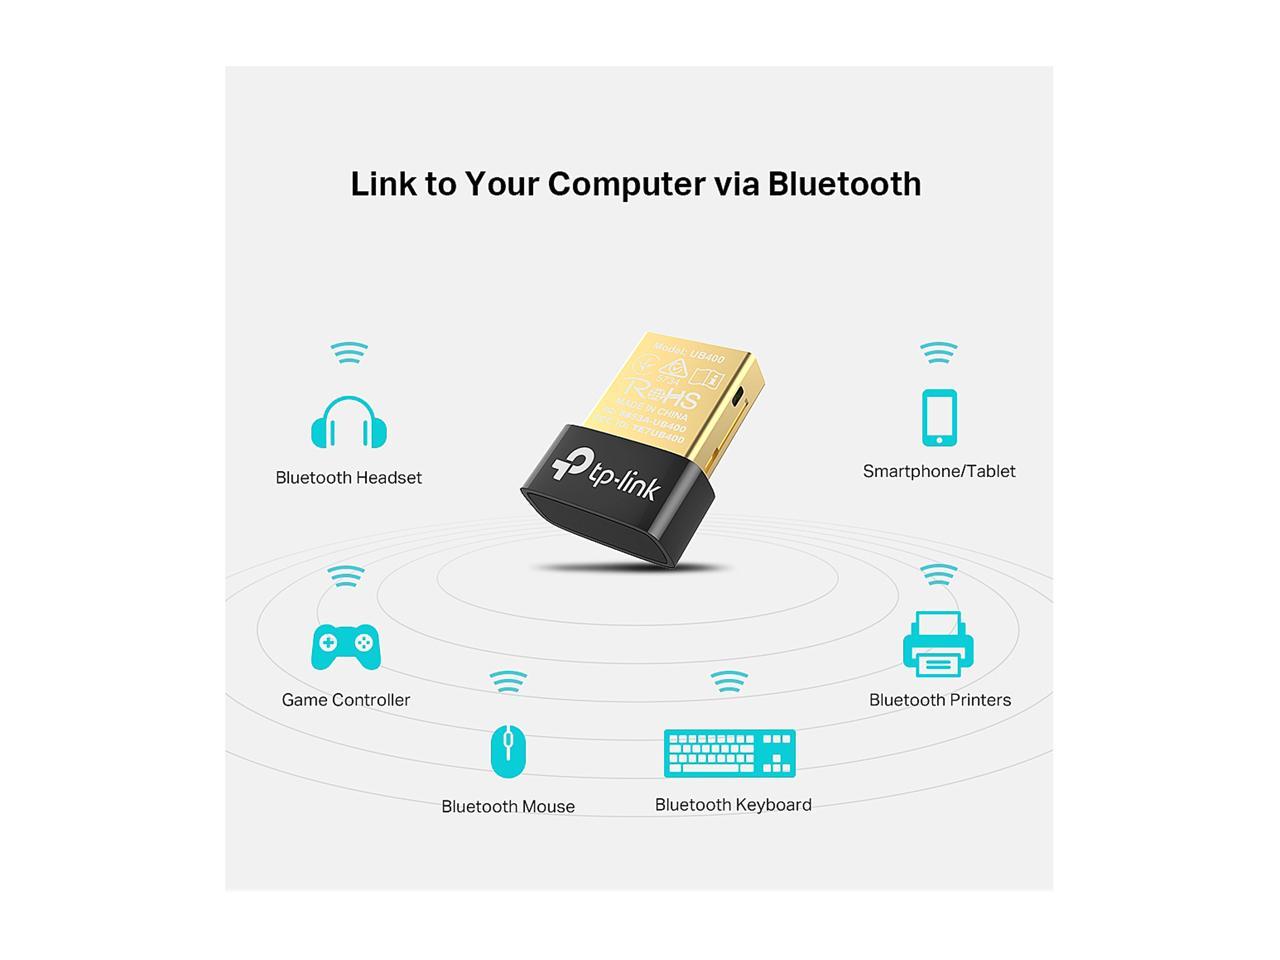 Proficiat Ongewijzigd Binnenshuis TP-Link USB Bluetooth Adapter for PC, 4.0 Bluetooth Dongle Receiver Support  Windows 10/8.1/8/7/XP for Desktop, Laptop, Mouse, Keyboard, Printers,  Headsets, Speakers, PS4/ Xbox Controllers (UB400) - Newegg.com